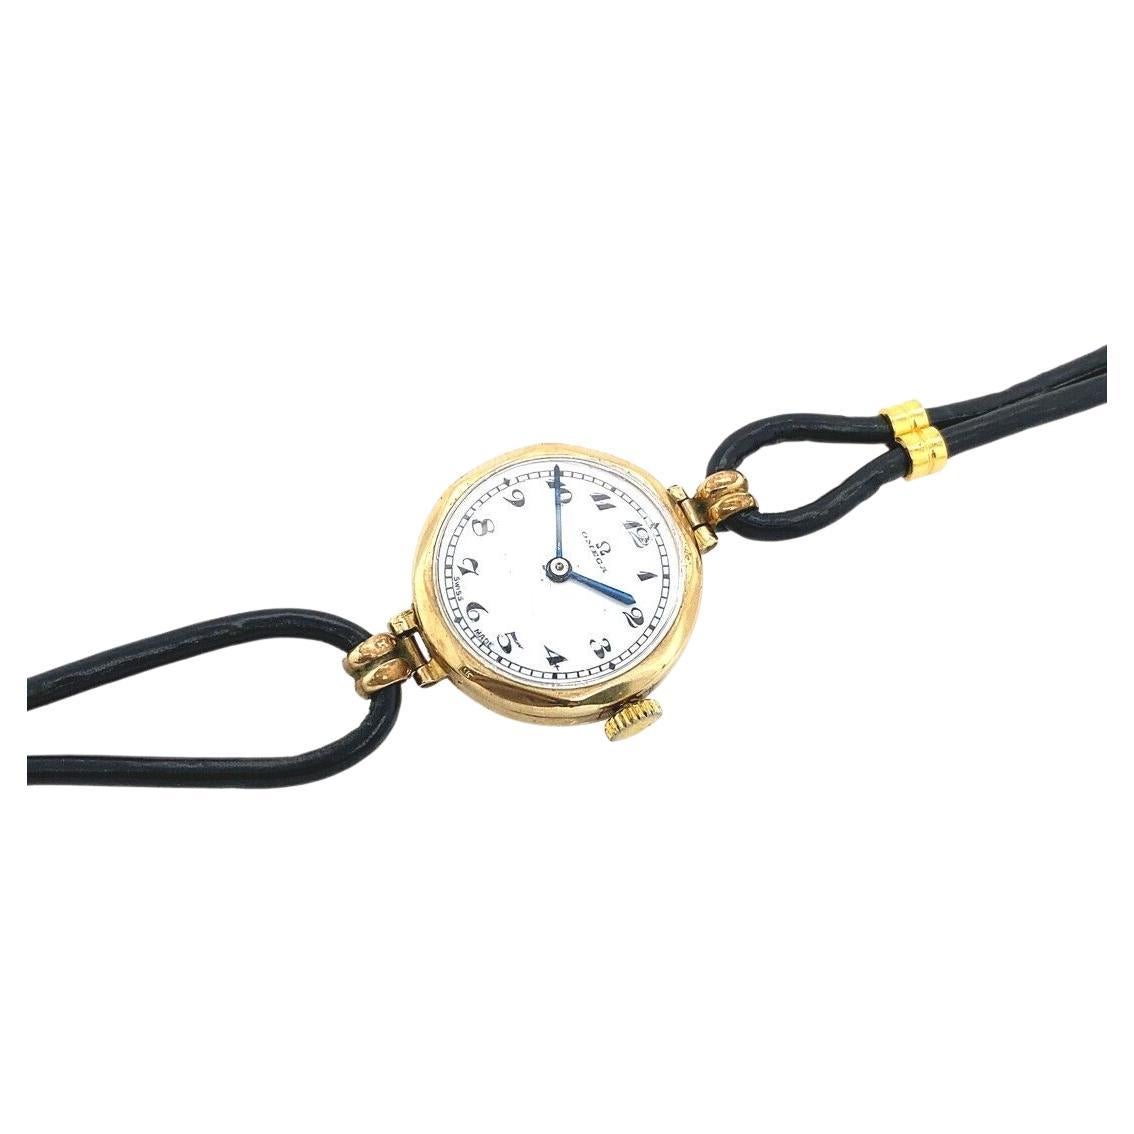 This is a classic vintage ladies watch. Its round face is Gold-plated & leather strap, and the case is 9ct Gold. It has 15 jewels, and the movement is manual. The watch is in excellent condition.

Additional Information:
Case Size: 21mm
Strap Width: